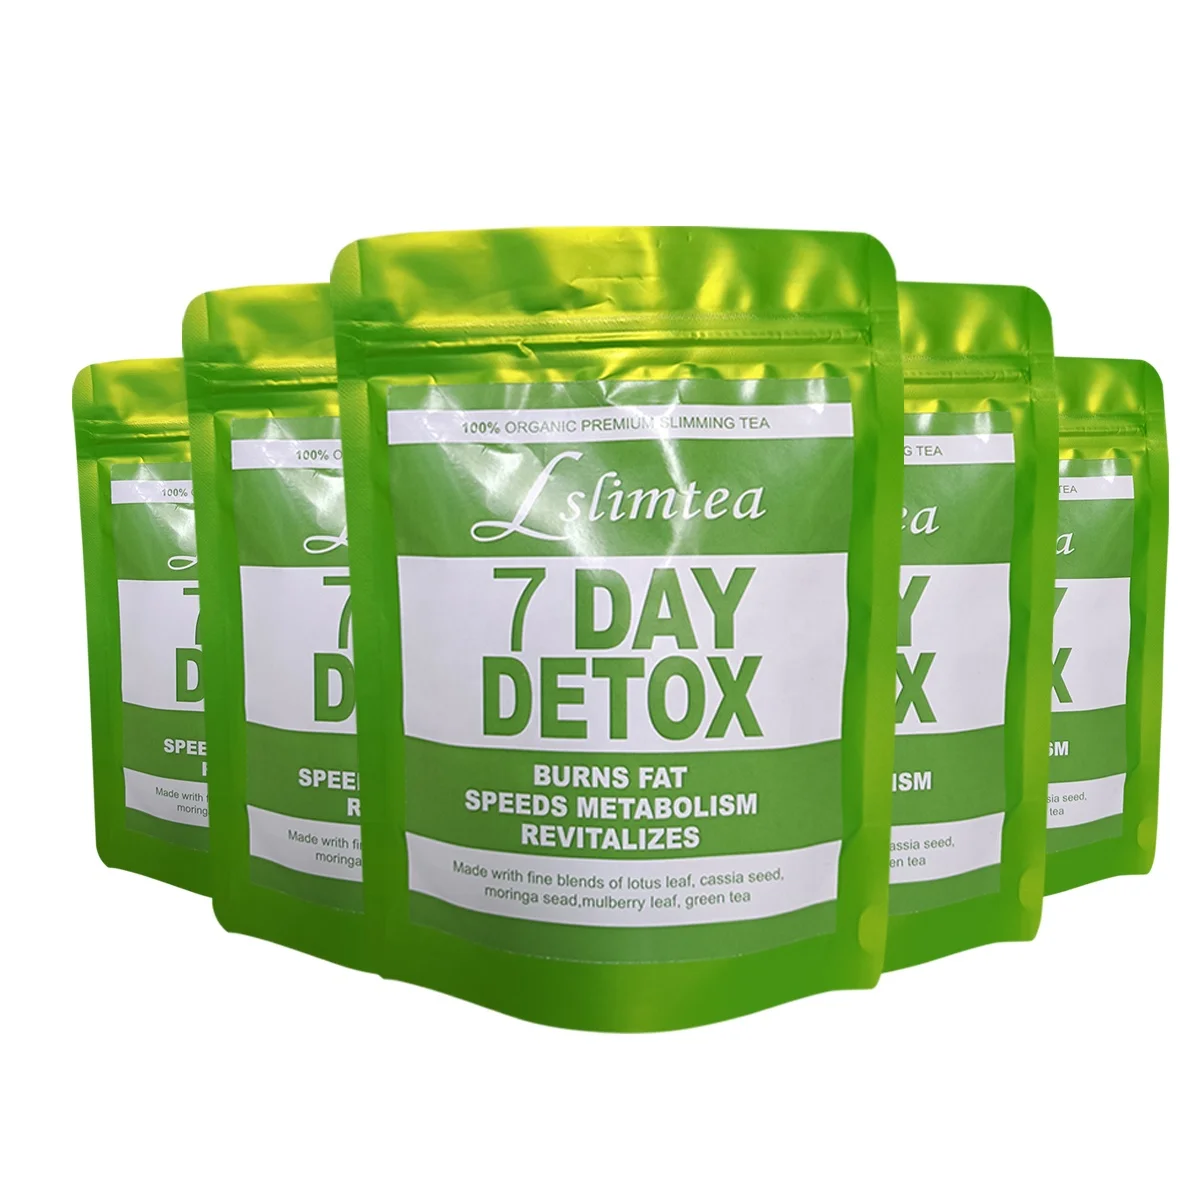 7 days /28 days Detox Slimming Tea burn fat Loss Weight Boost Private Label Manufacturers Fitne